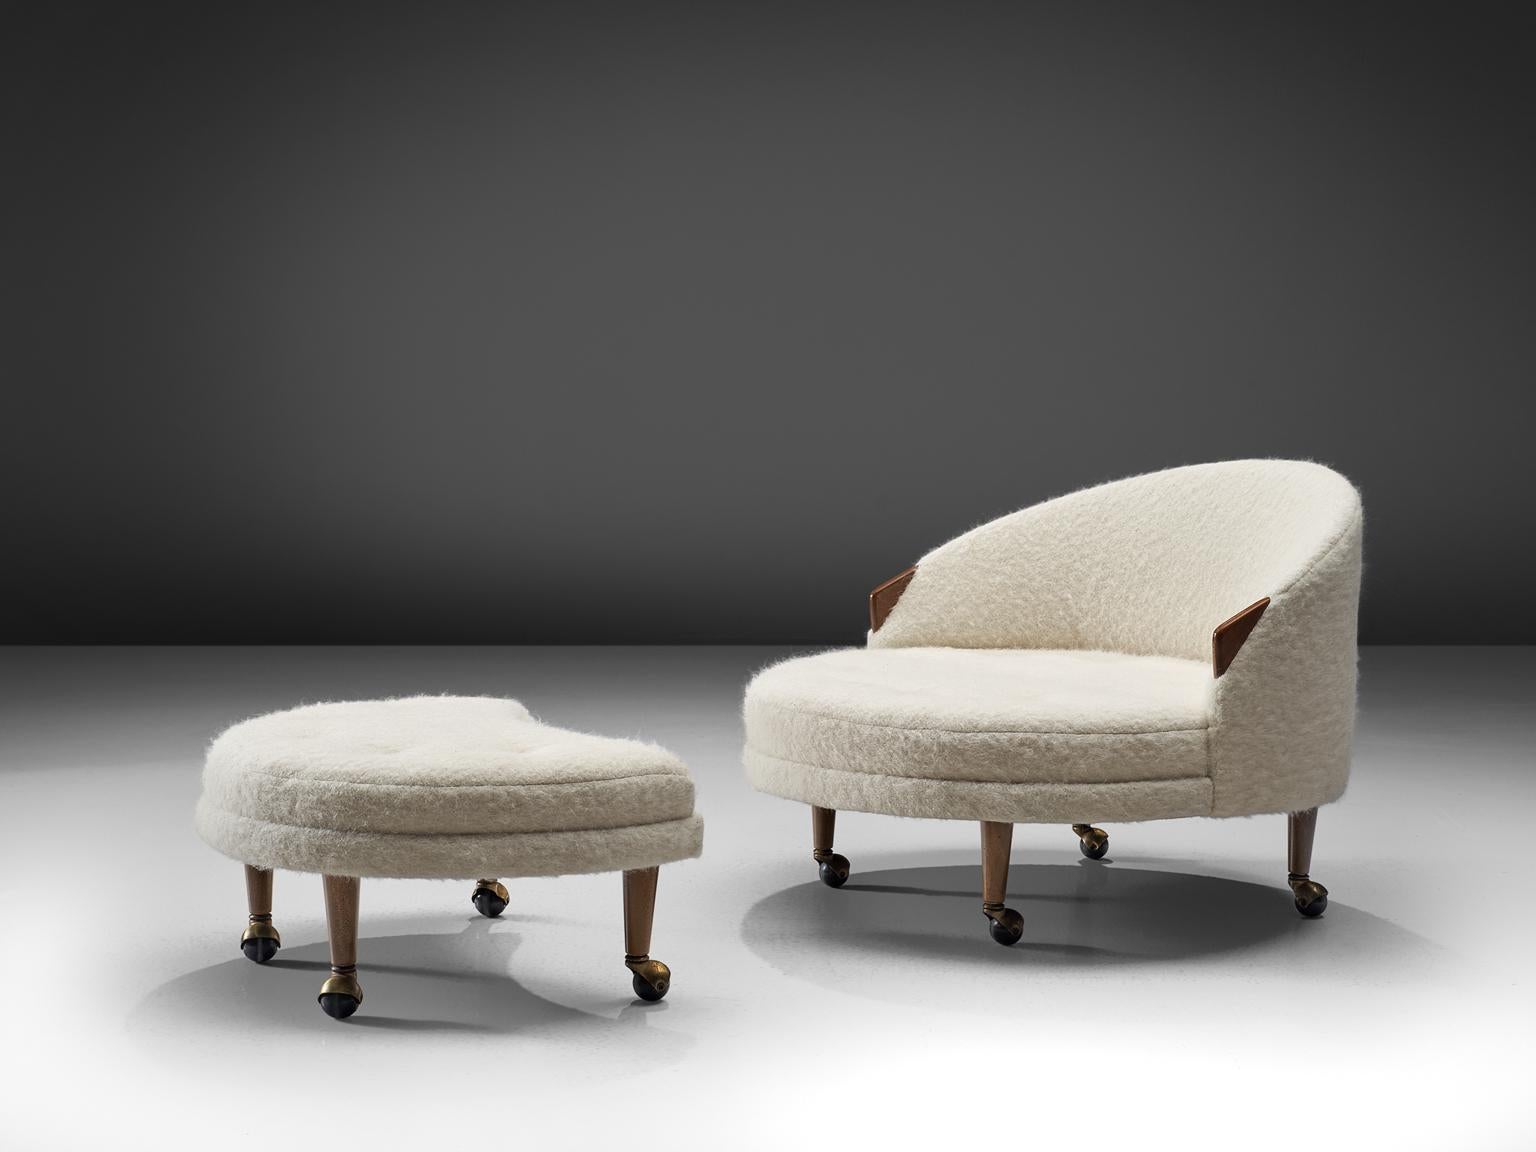 Adrian Pearsall for Craft Associates, 'Havana' lounge chair and ottoman, walnut and Pierre Frey woolen upholstery with walnut, United States, 1960s.

This lounge chair and ottoman with small walnut armrests and wheels underneath each item, are